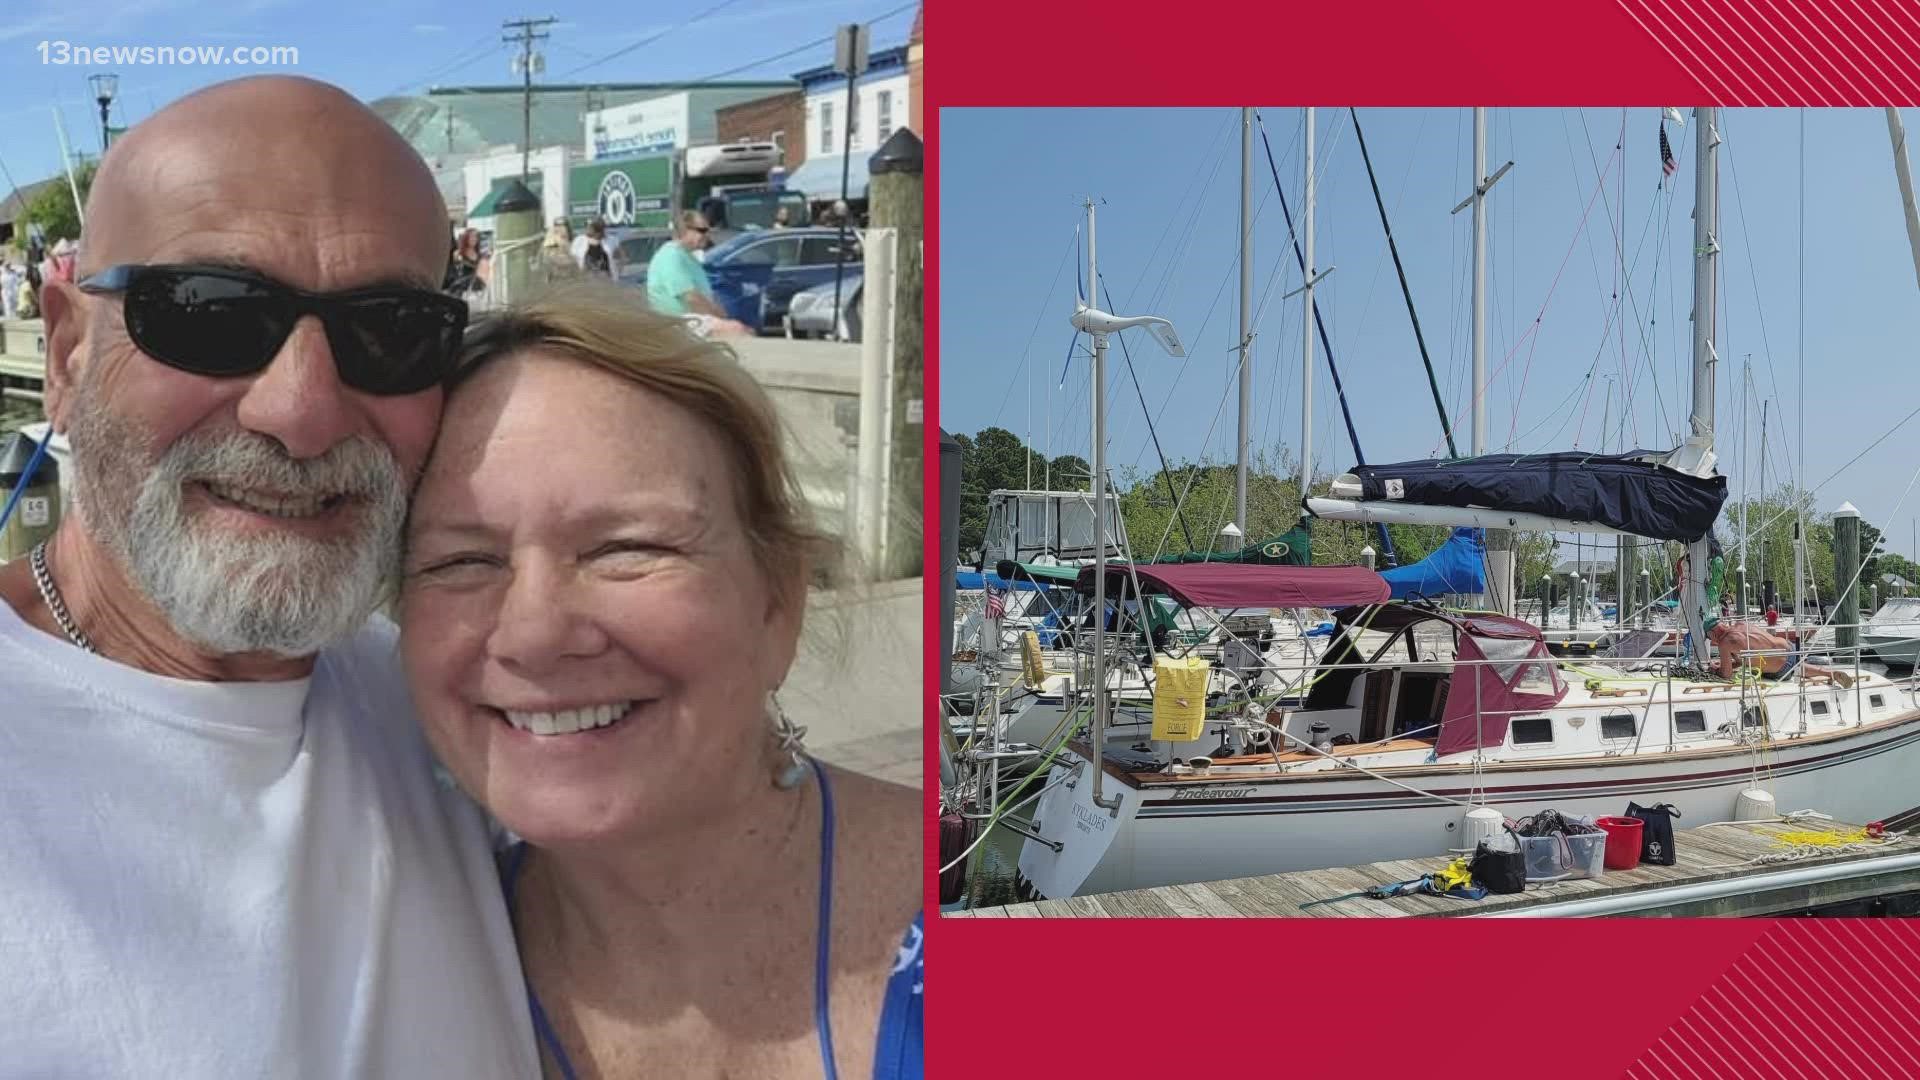 According to the Coast Guard, Yanni Nikopoulos and Gale Jones, both 65, failed to return from their sailing trip on June 20.